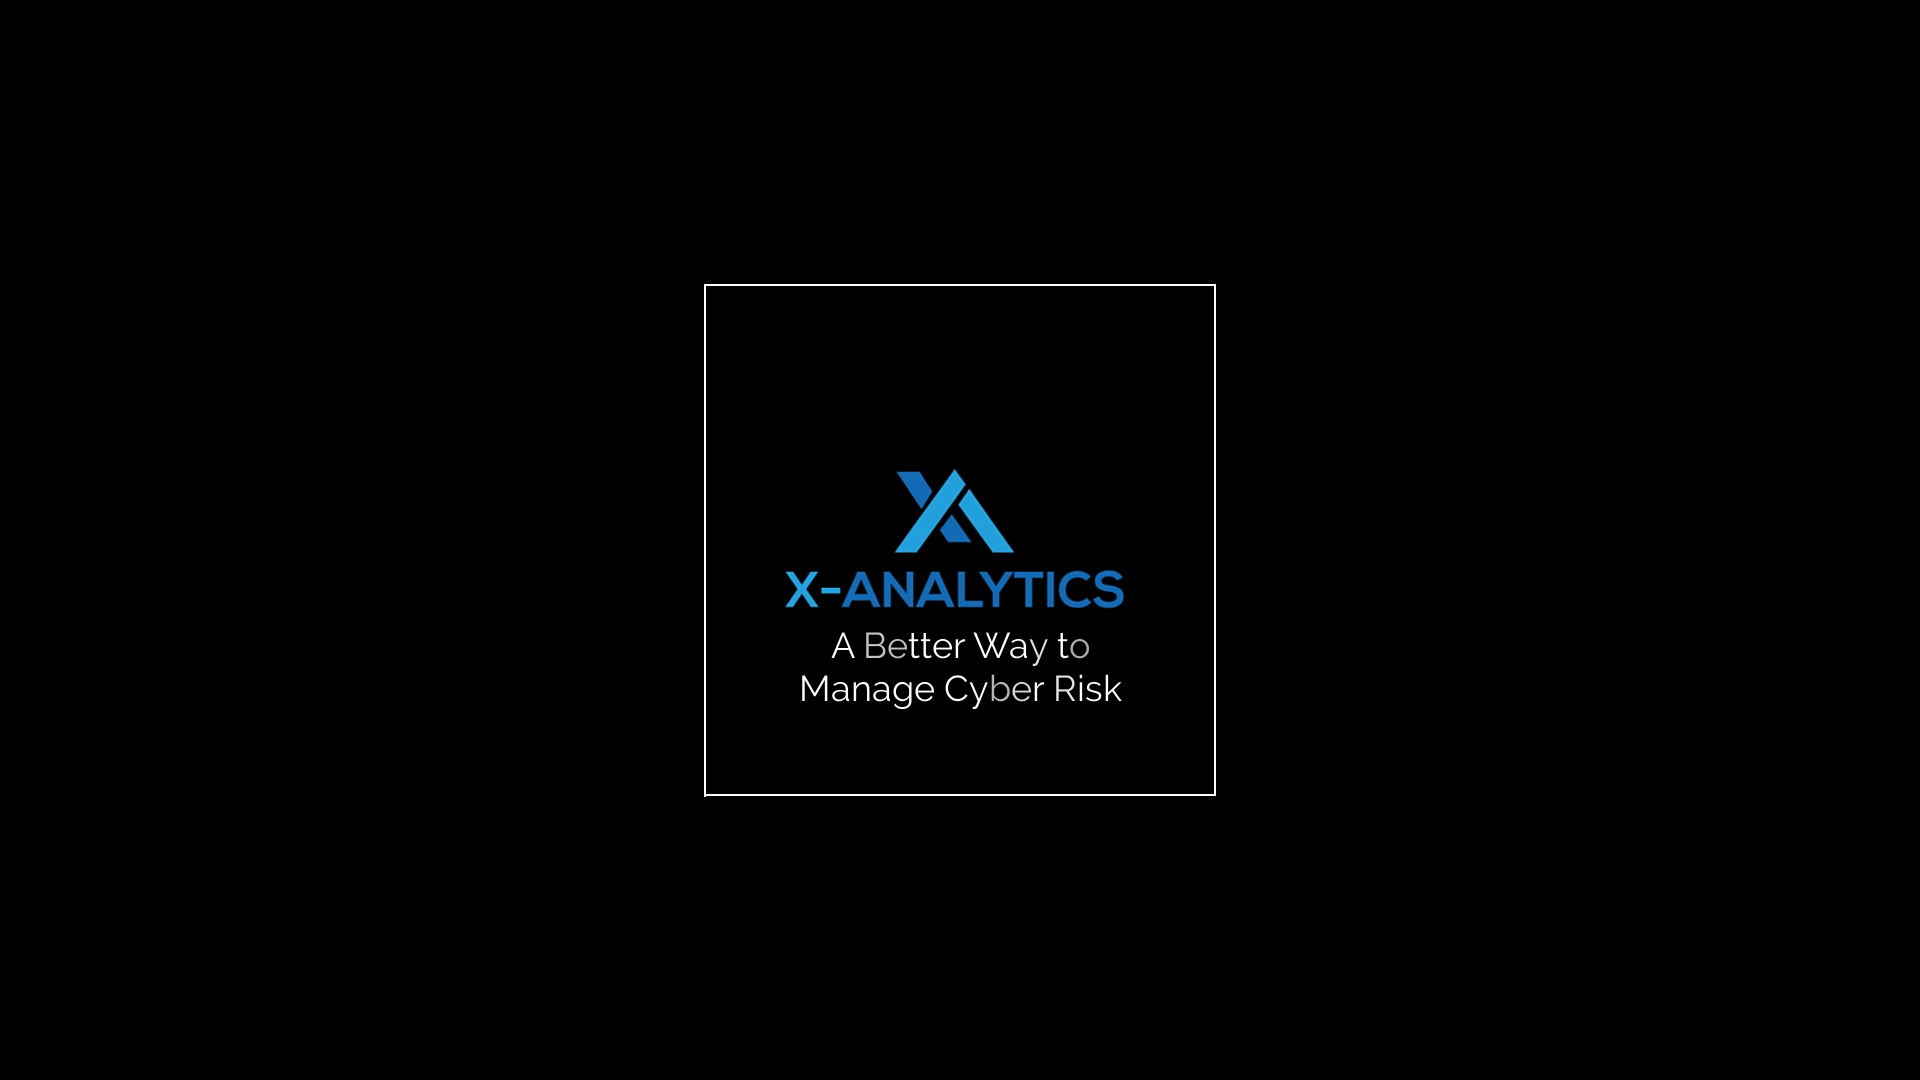 Visit www.x-analytics.com to get started today.